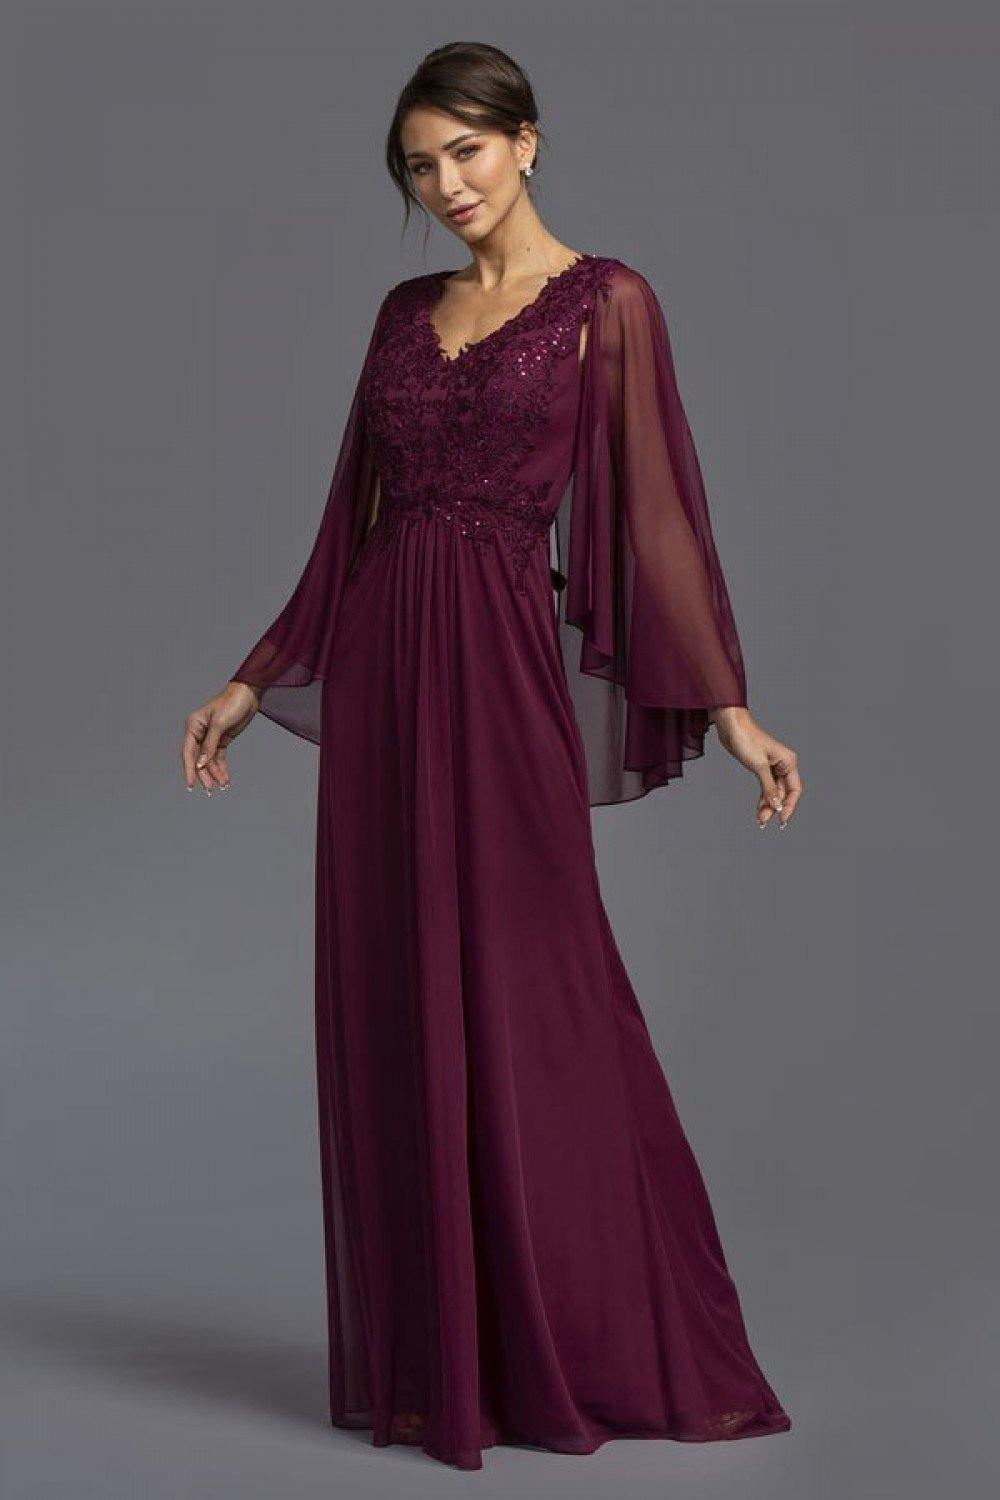 Long Formal Dress with Cape Plum - The Dress Outlet ASpeed